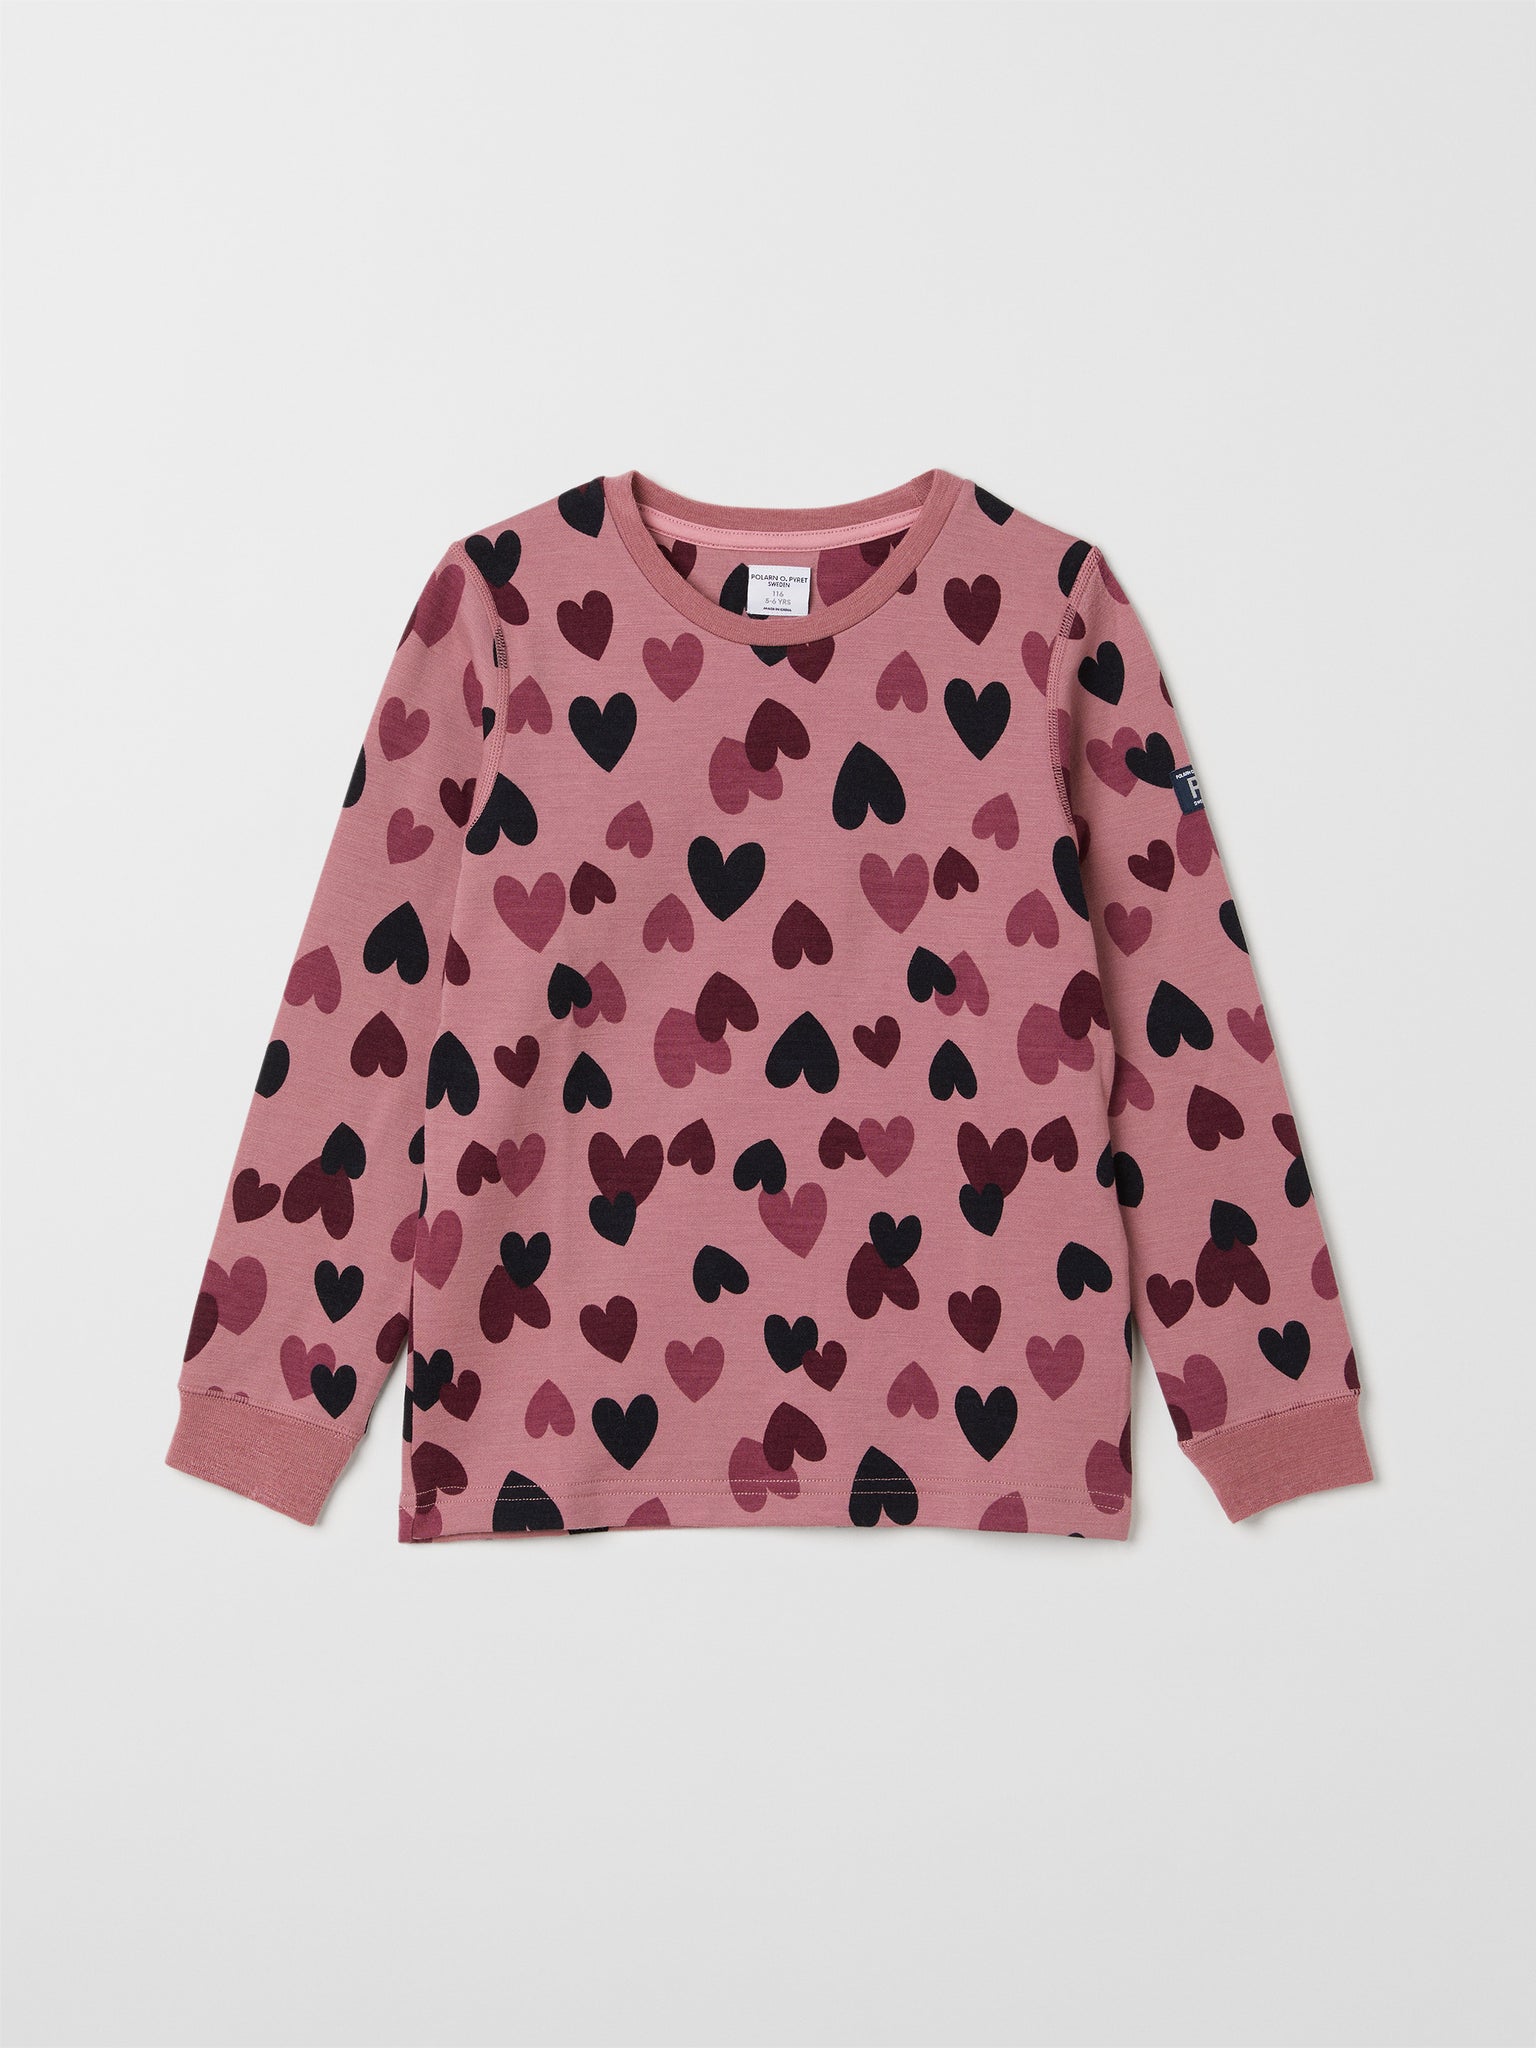 Merino Wool Pink Kids Thermal Top from the Polarn O. Pyret kids collection. Nordic kids clothes made from sustainable sources.